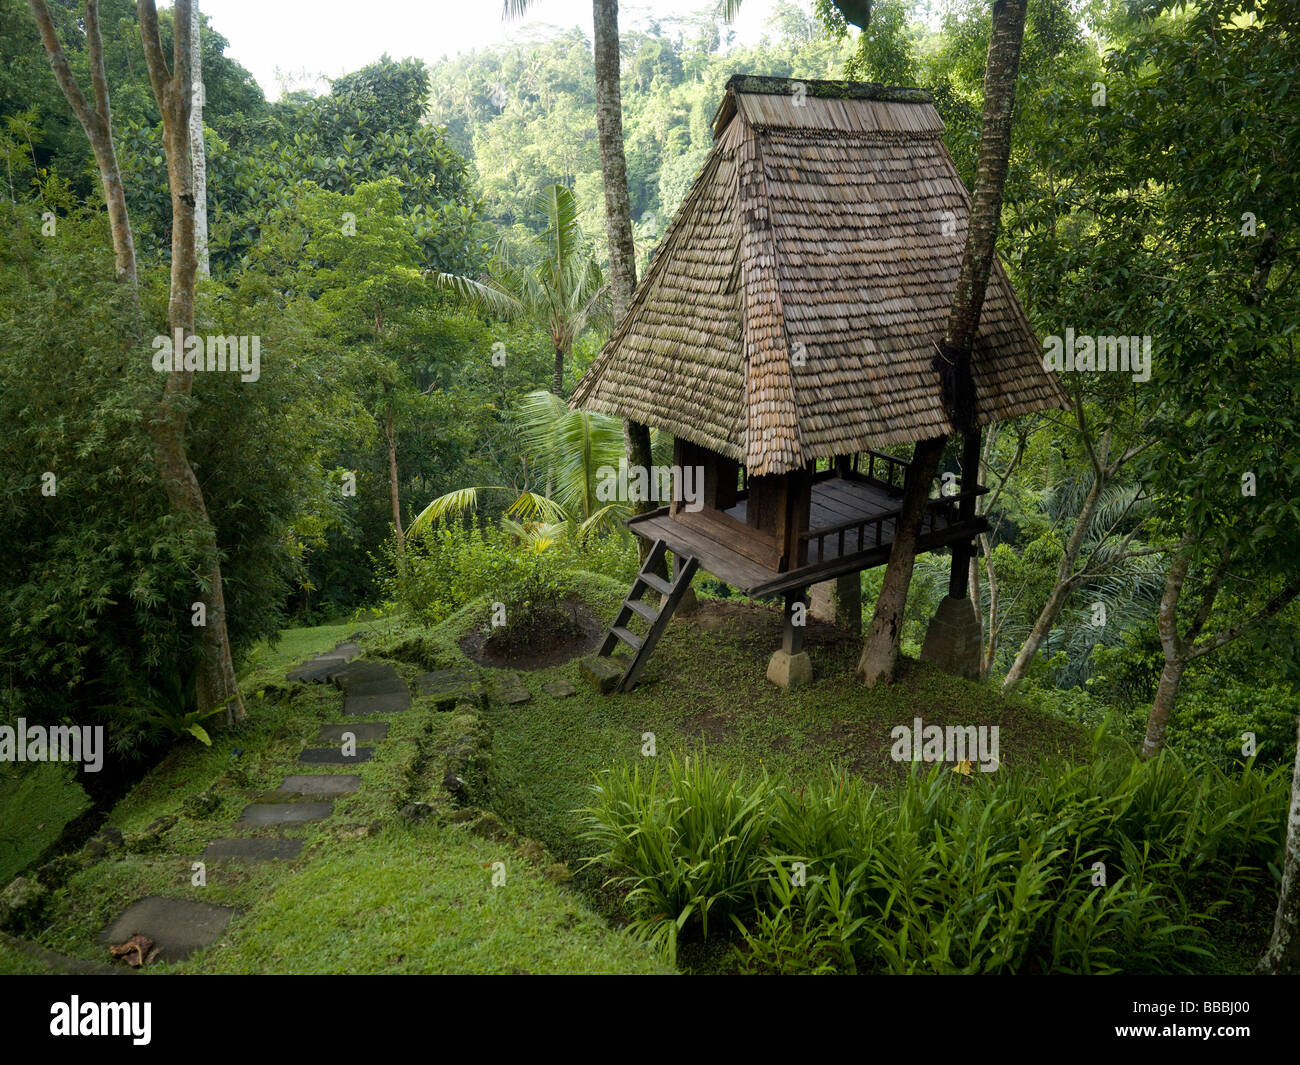 Wooden hut in forest; Stock Photo